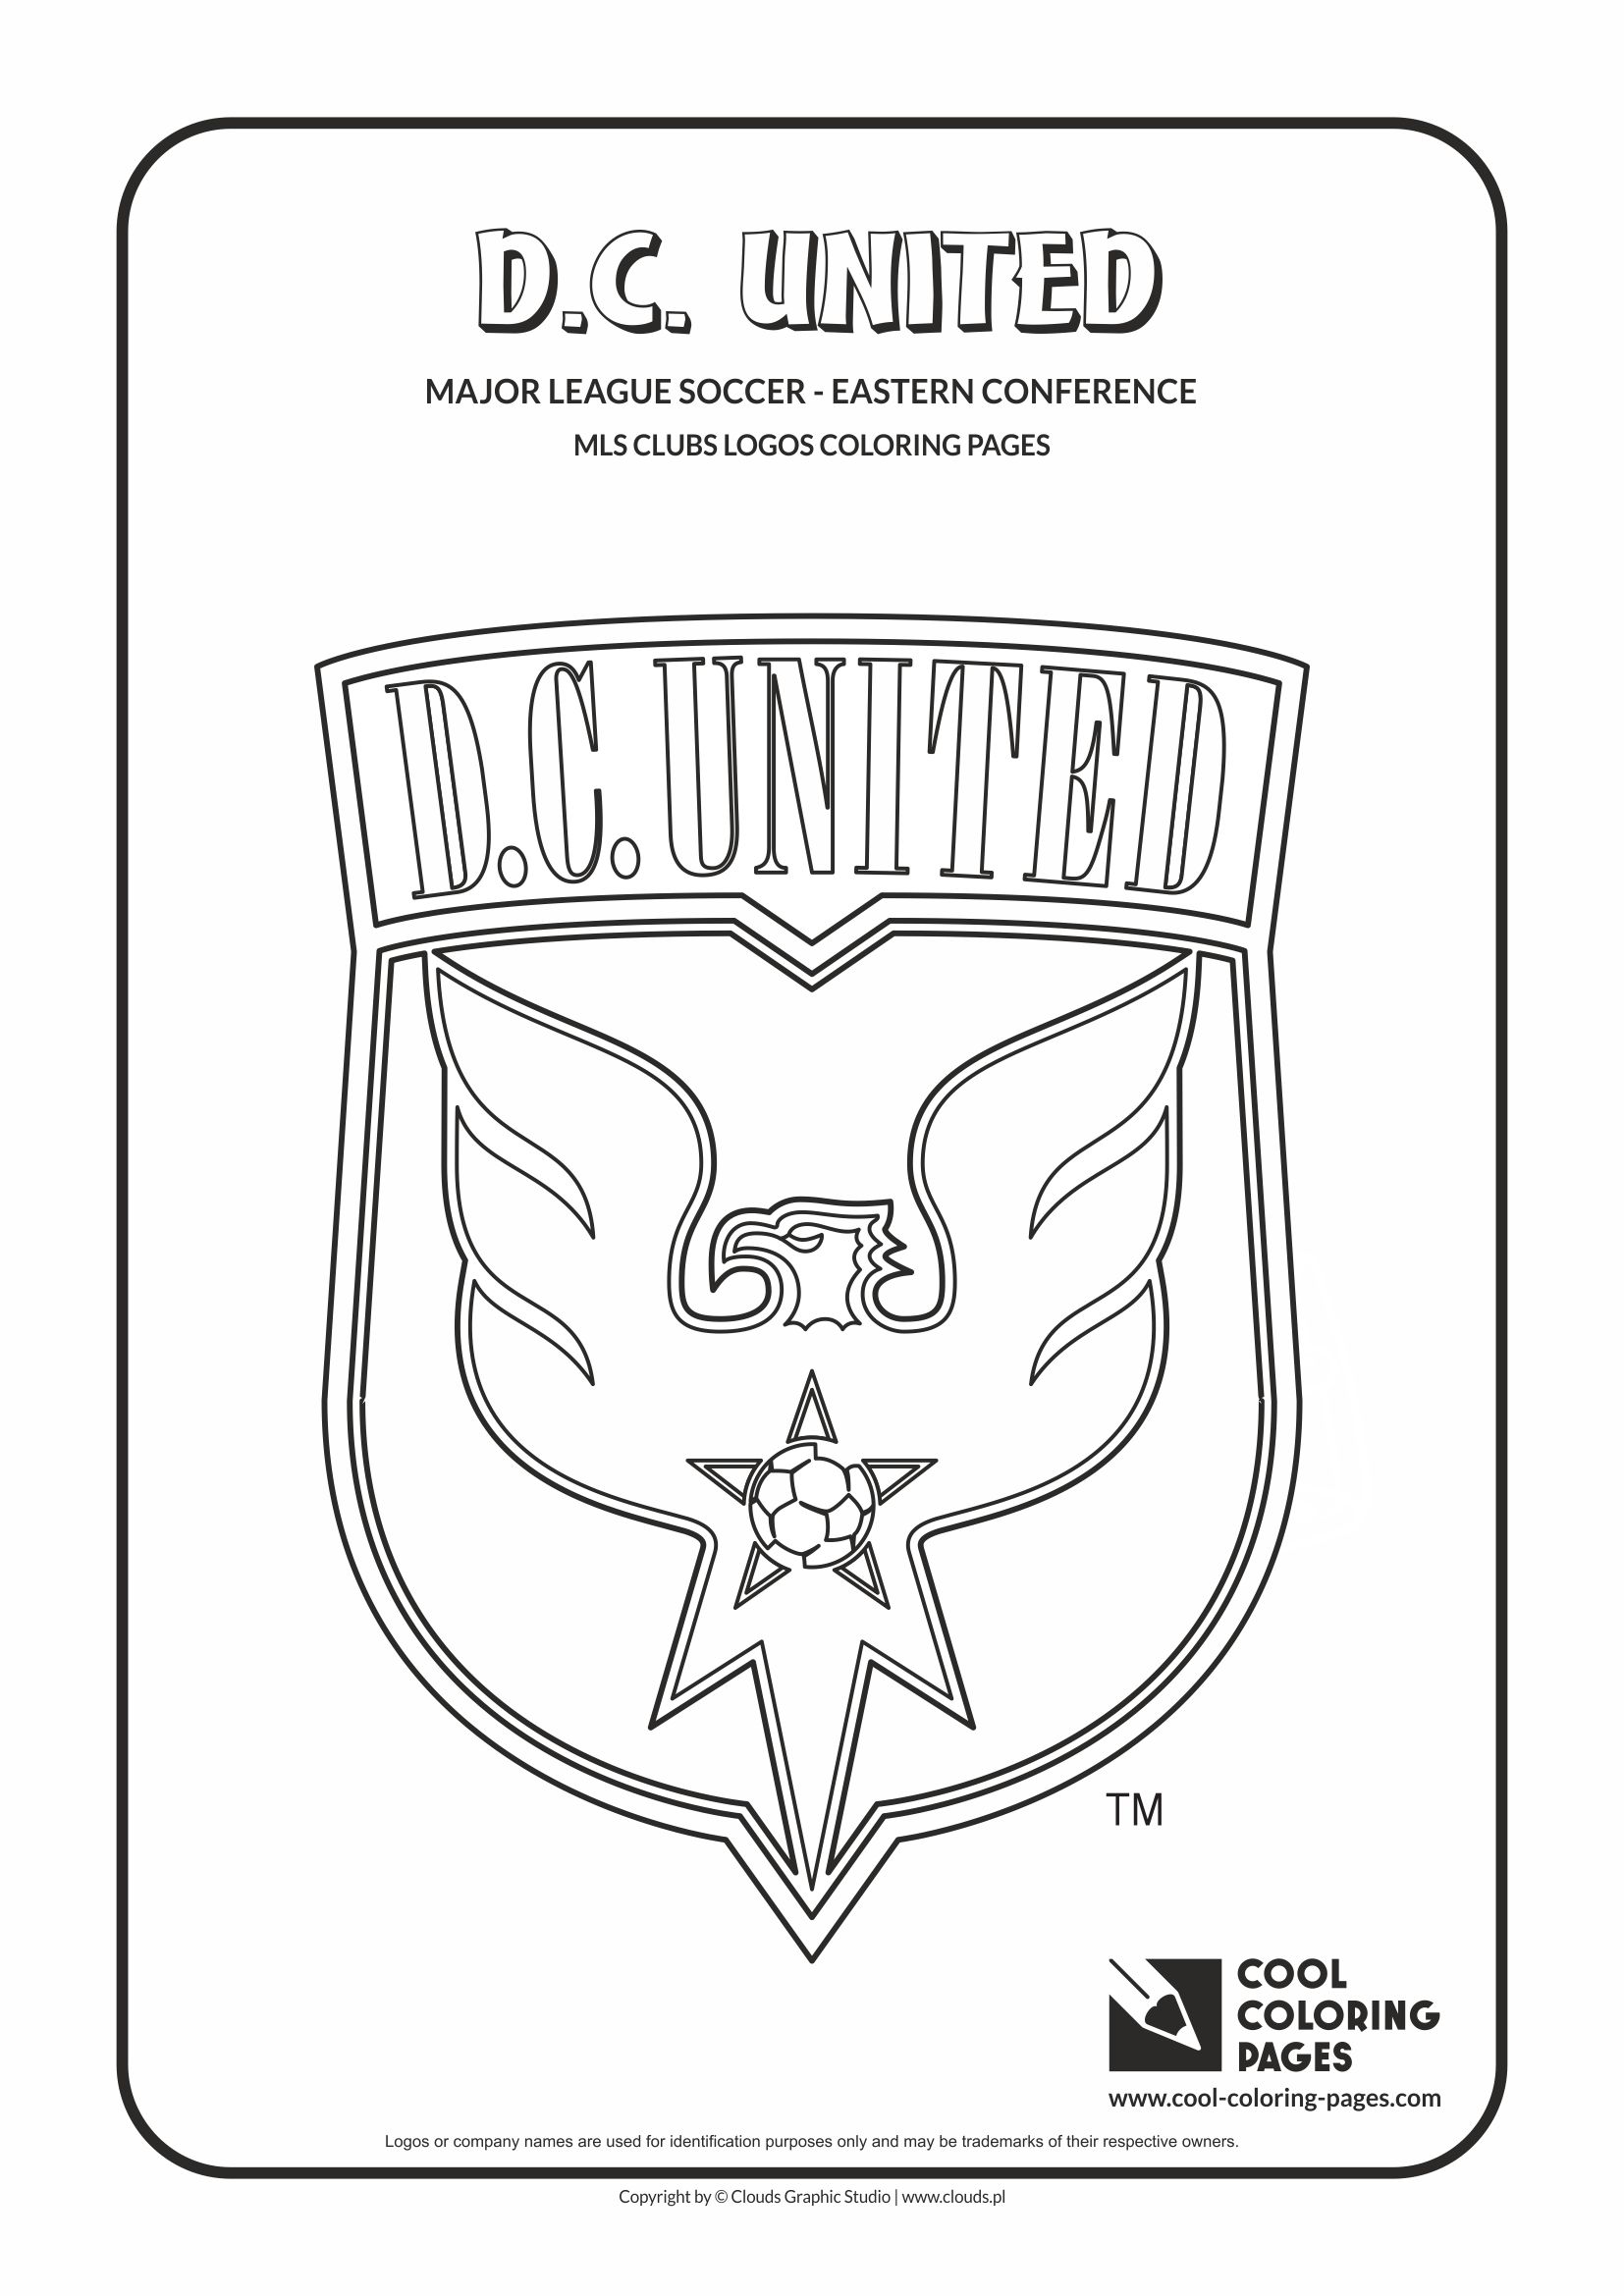 Cool Coloring Pages MLS soccer clubs logos coloring pages - Cool